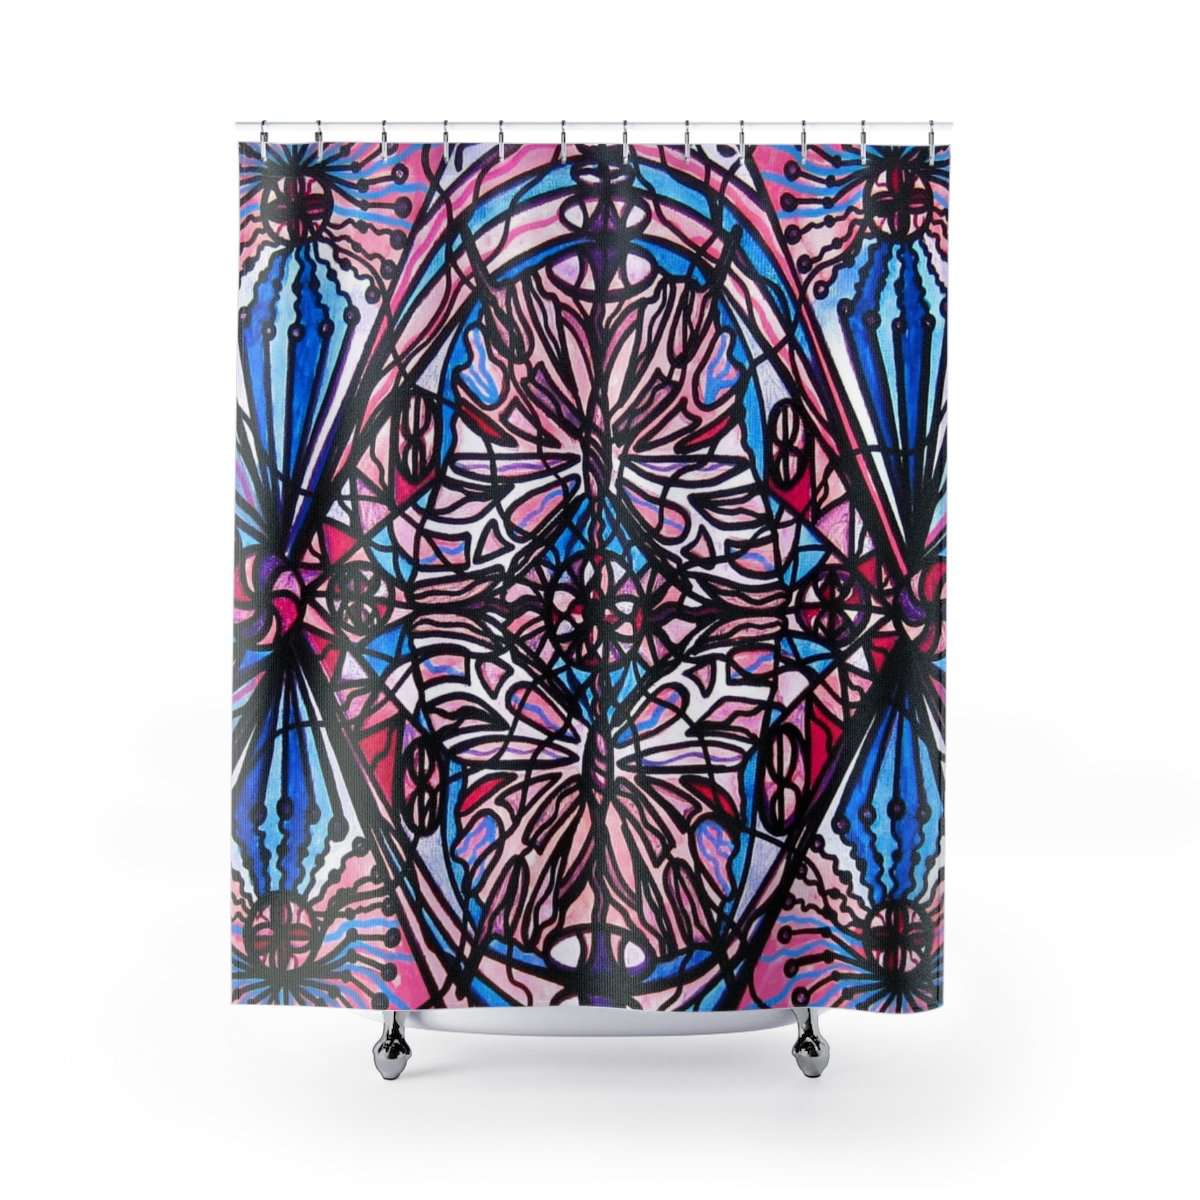 Conceive - Shower Curtains